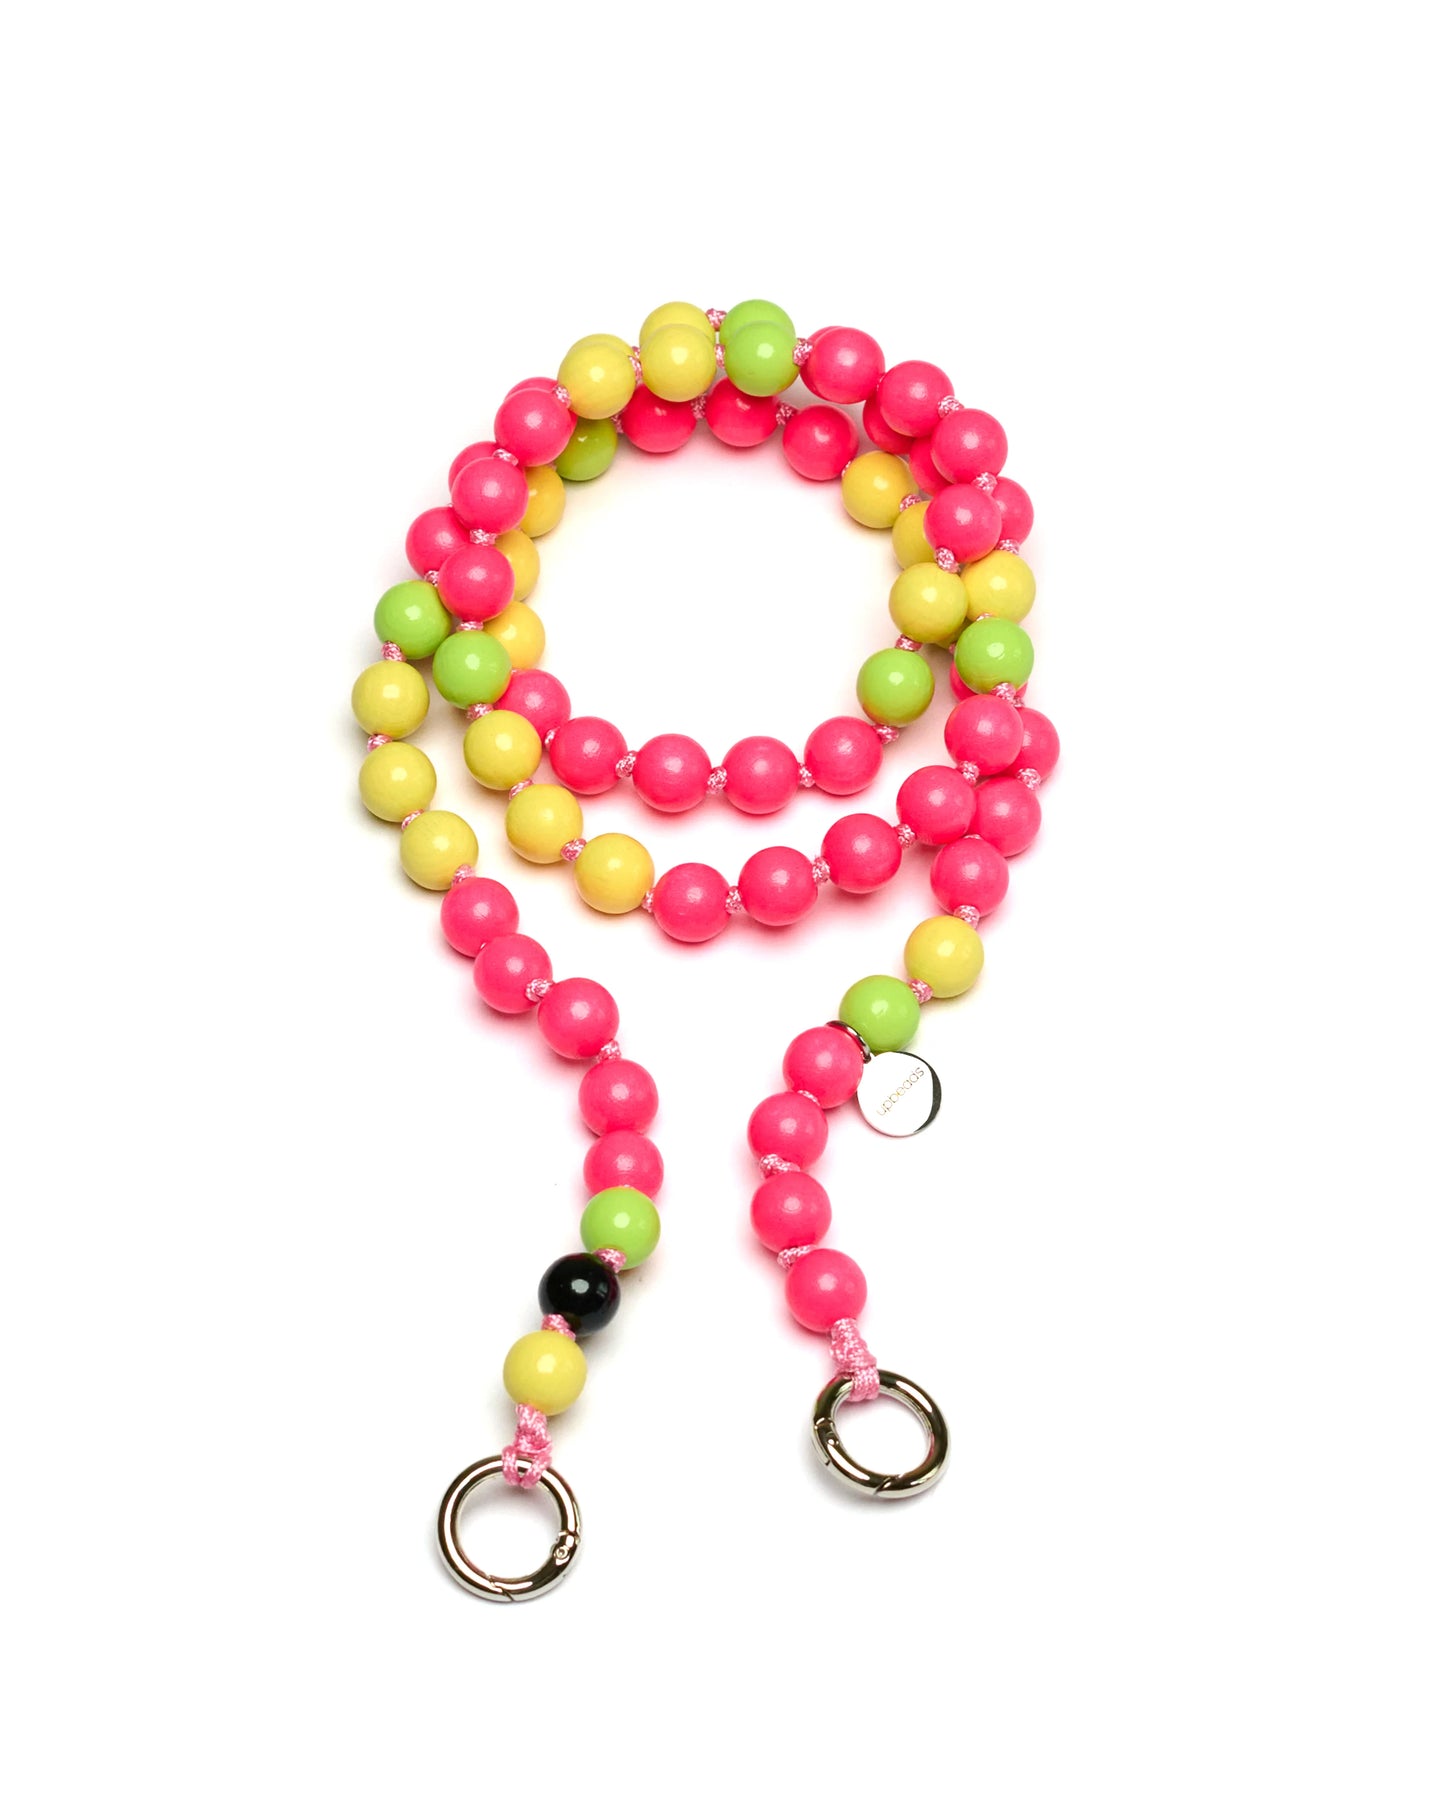 product picture of upbeads flashdance model crossbody with neon pink and yellow and lime wooden beads